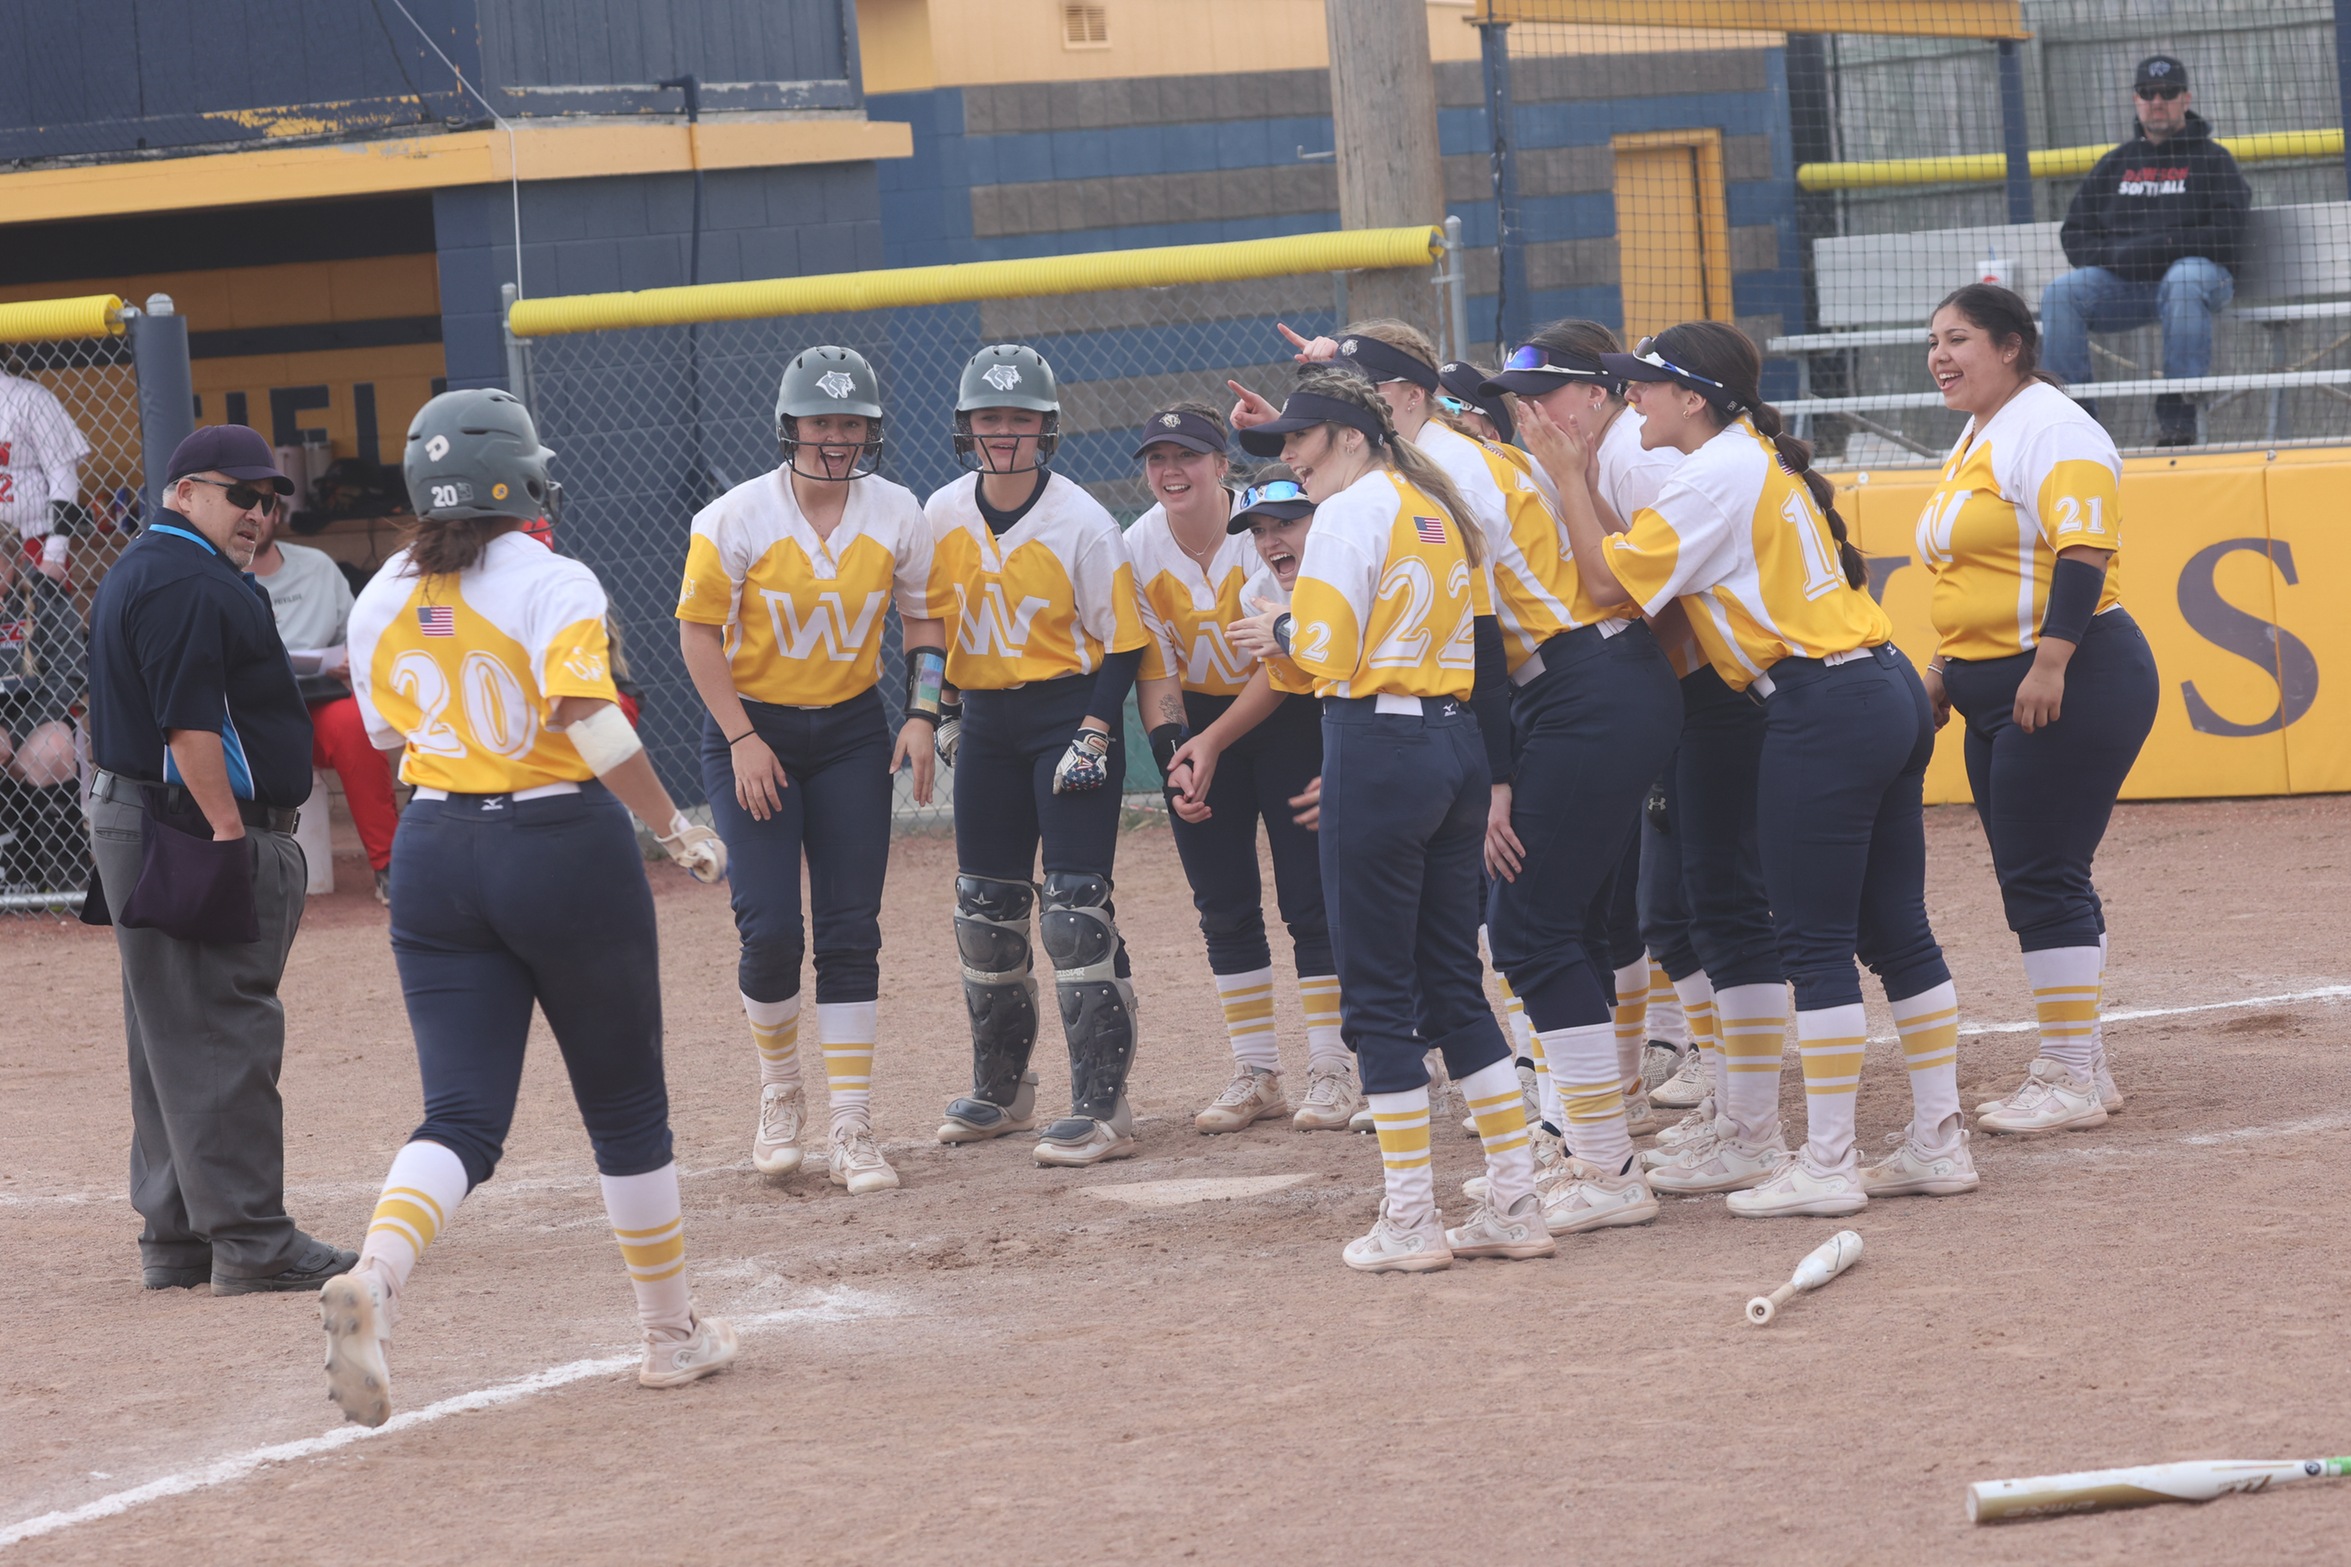 Jenika Fuentes gets celebrated at home plate after her 2-run home run.